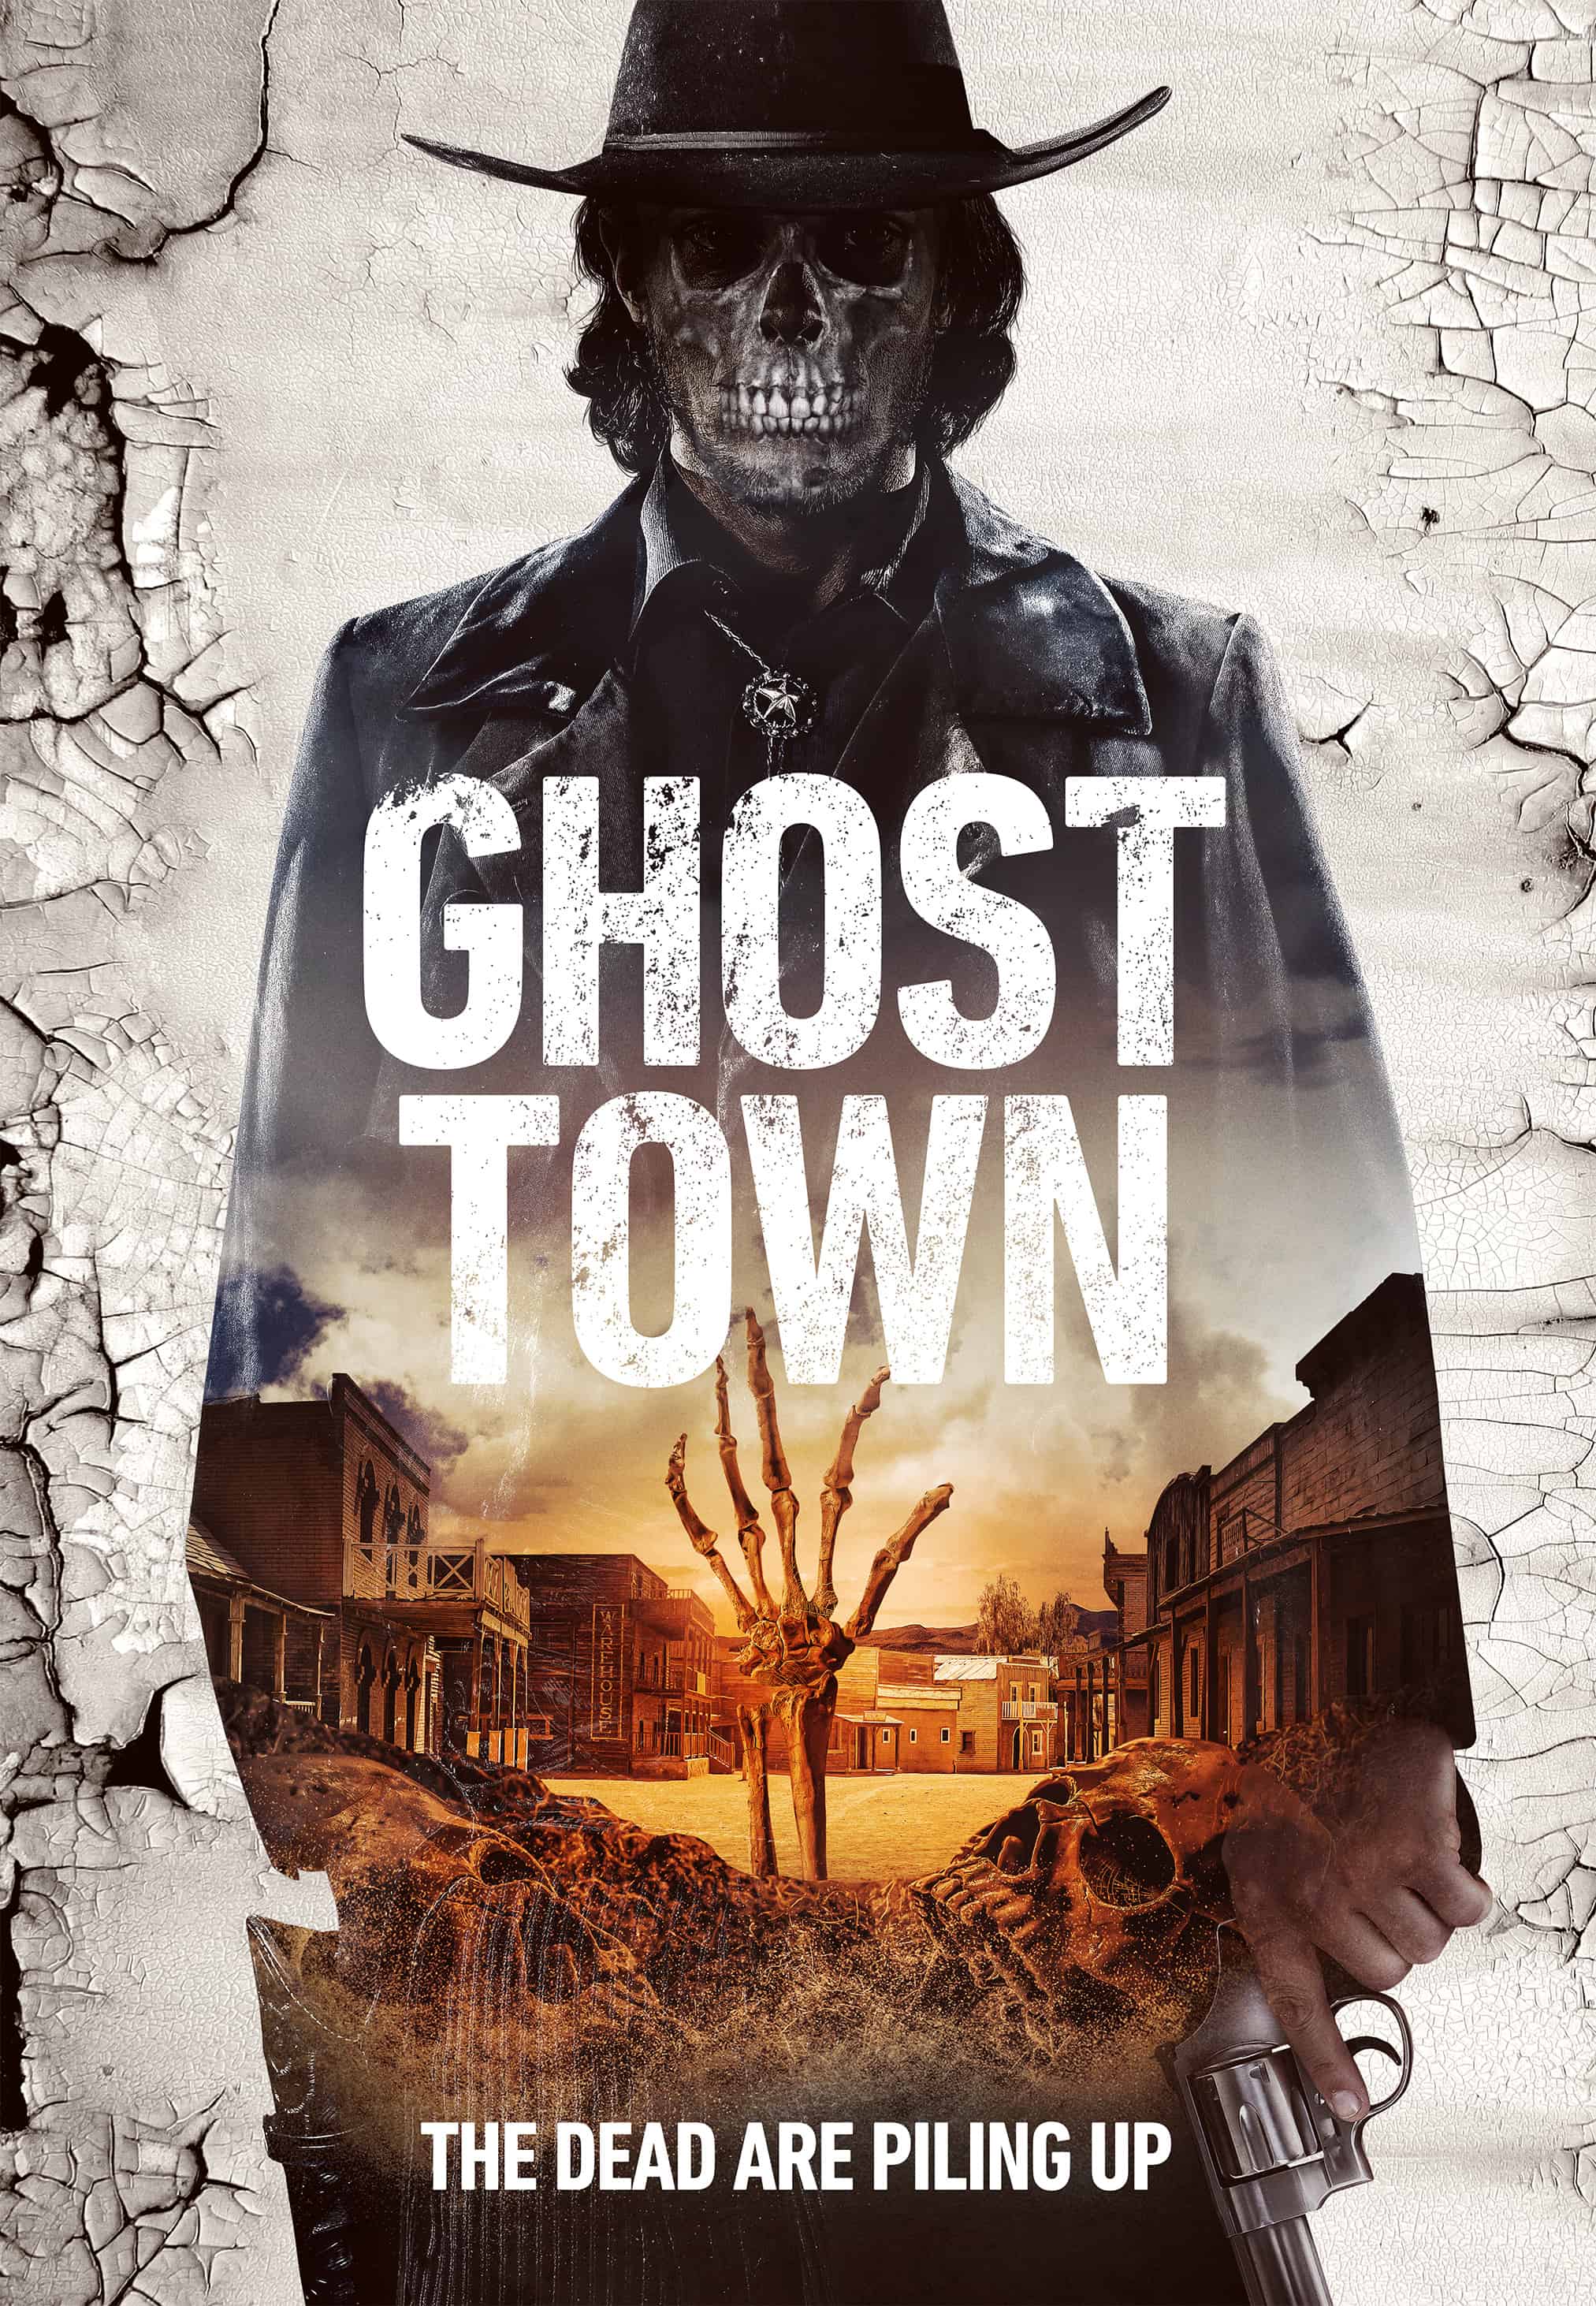 Ghost Town offers up a poster and trailer arrives March 7th 23